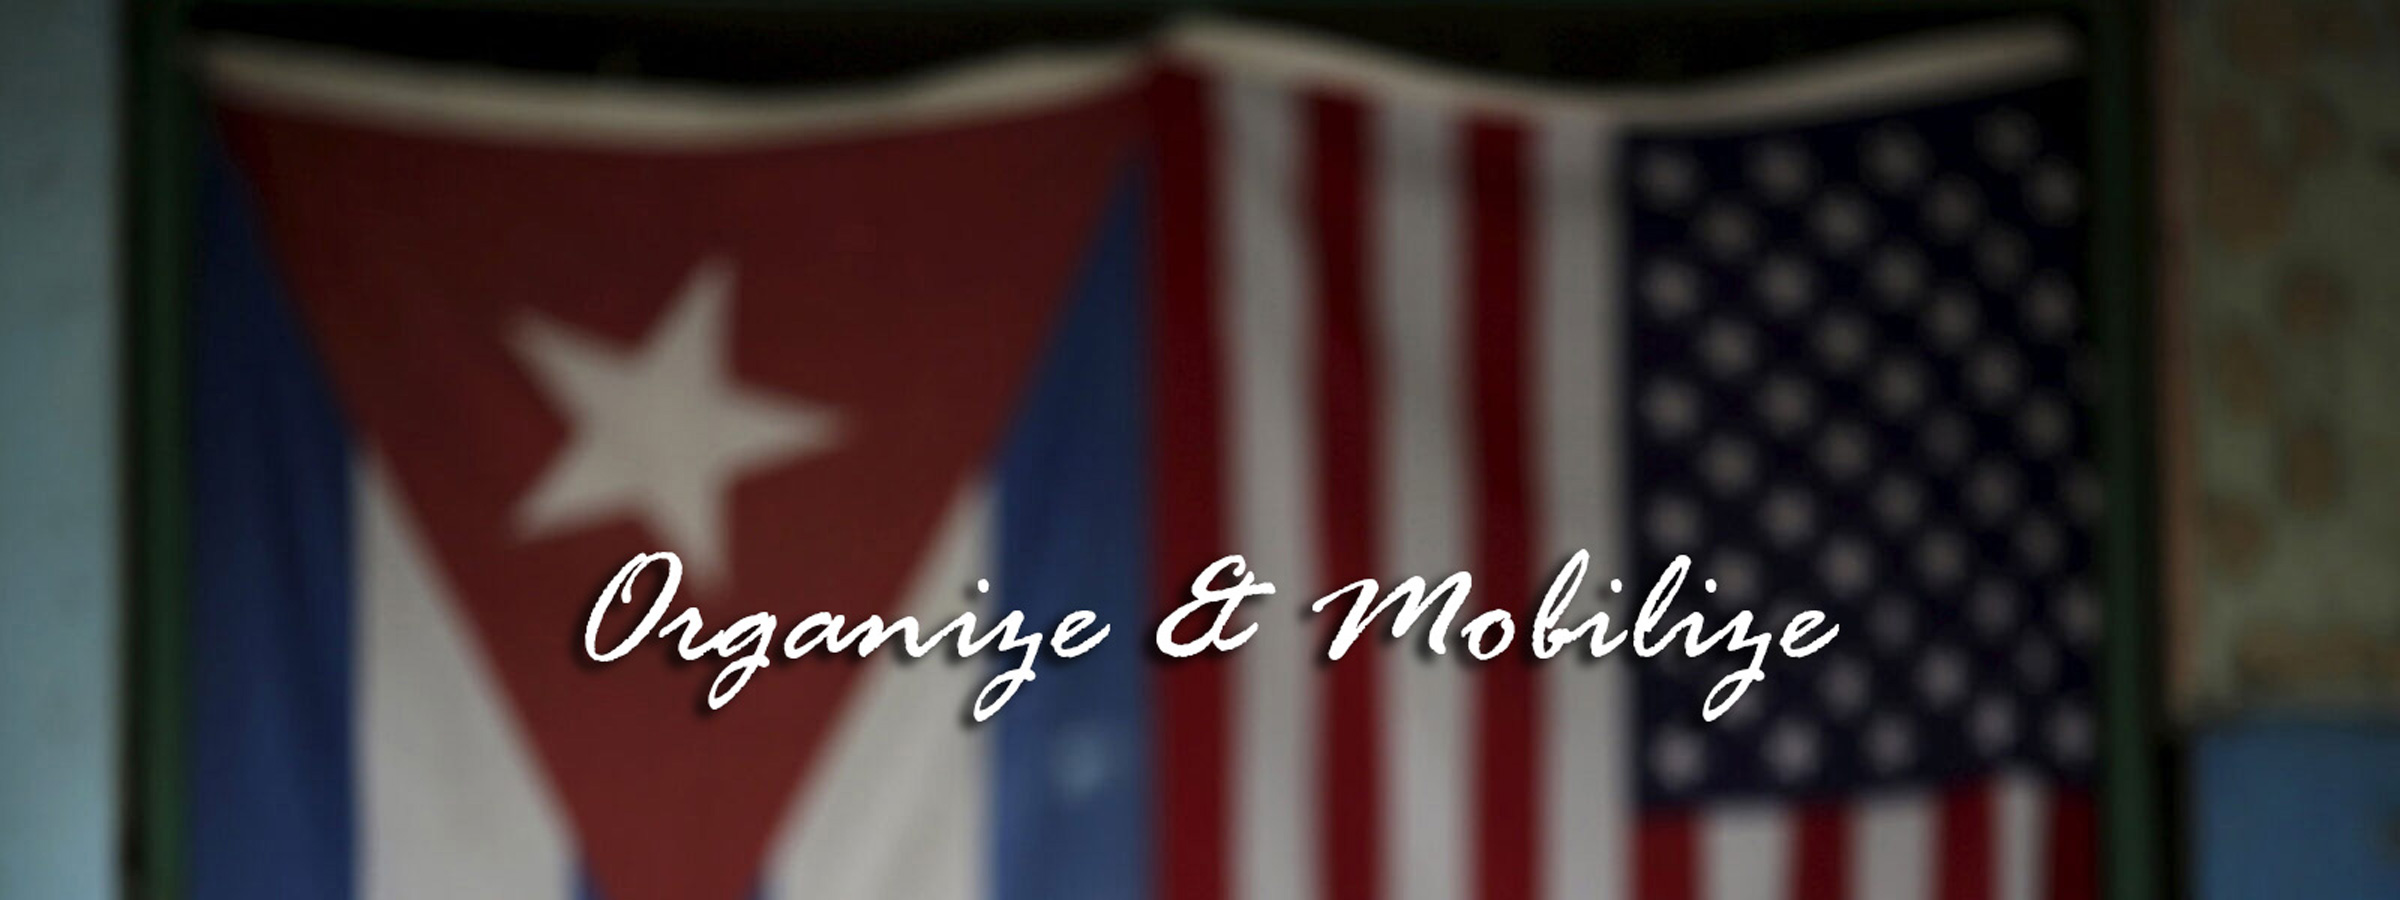 image of Cuban and US flags with words superimposed "organize & mobilize"